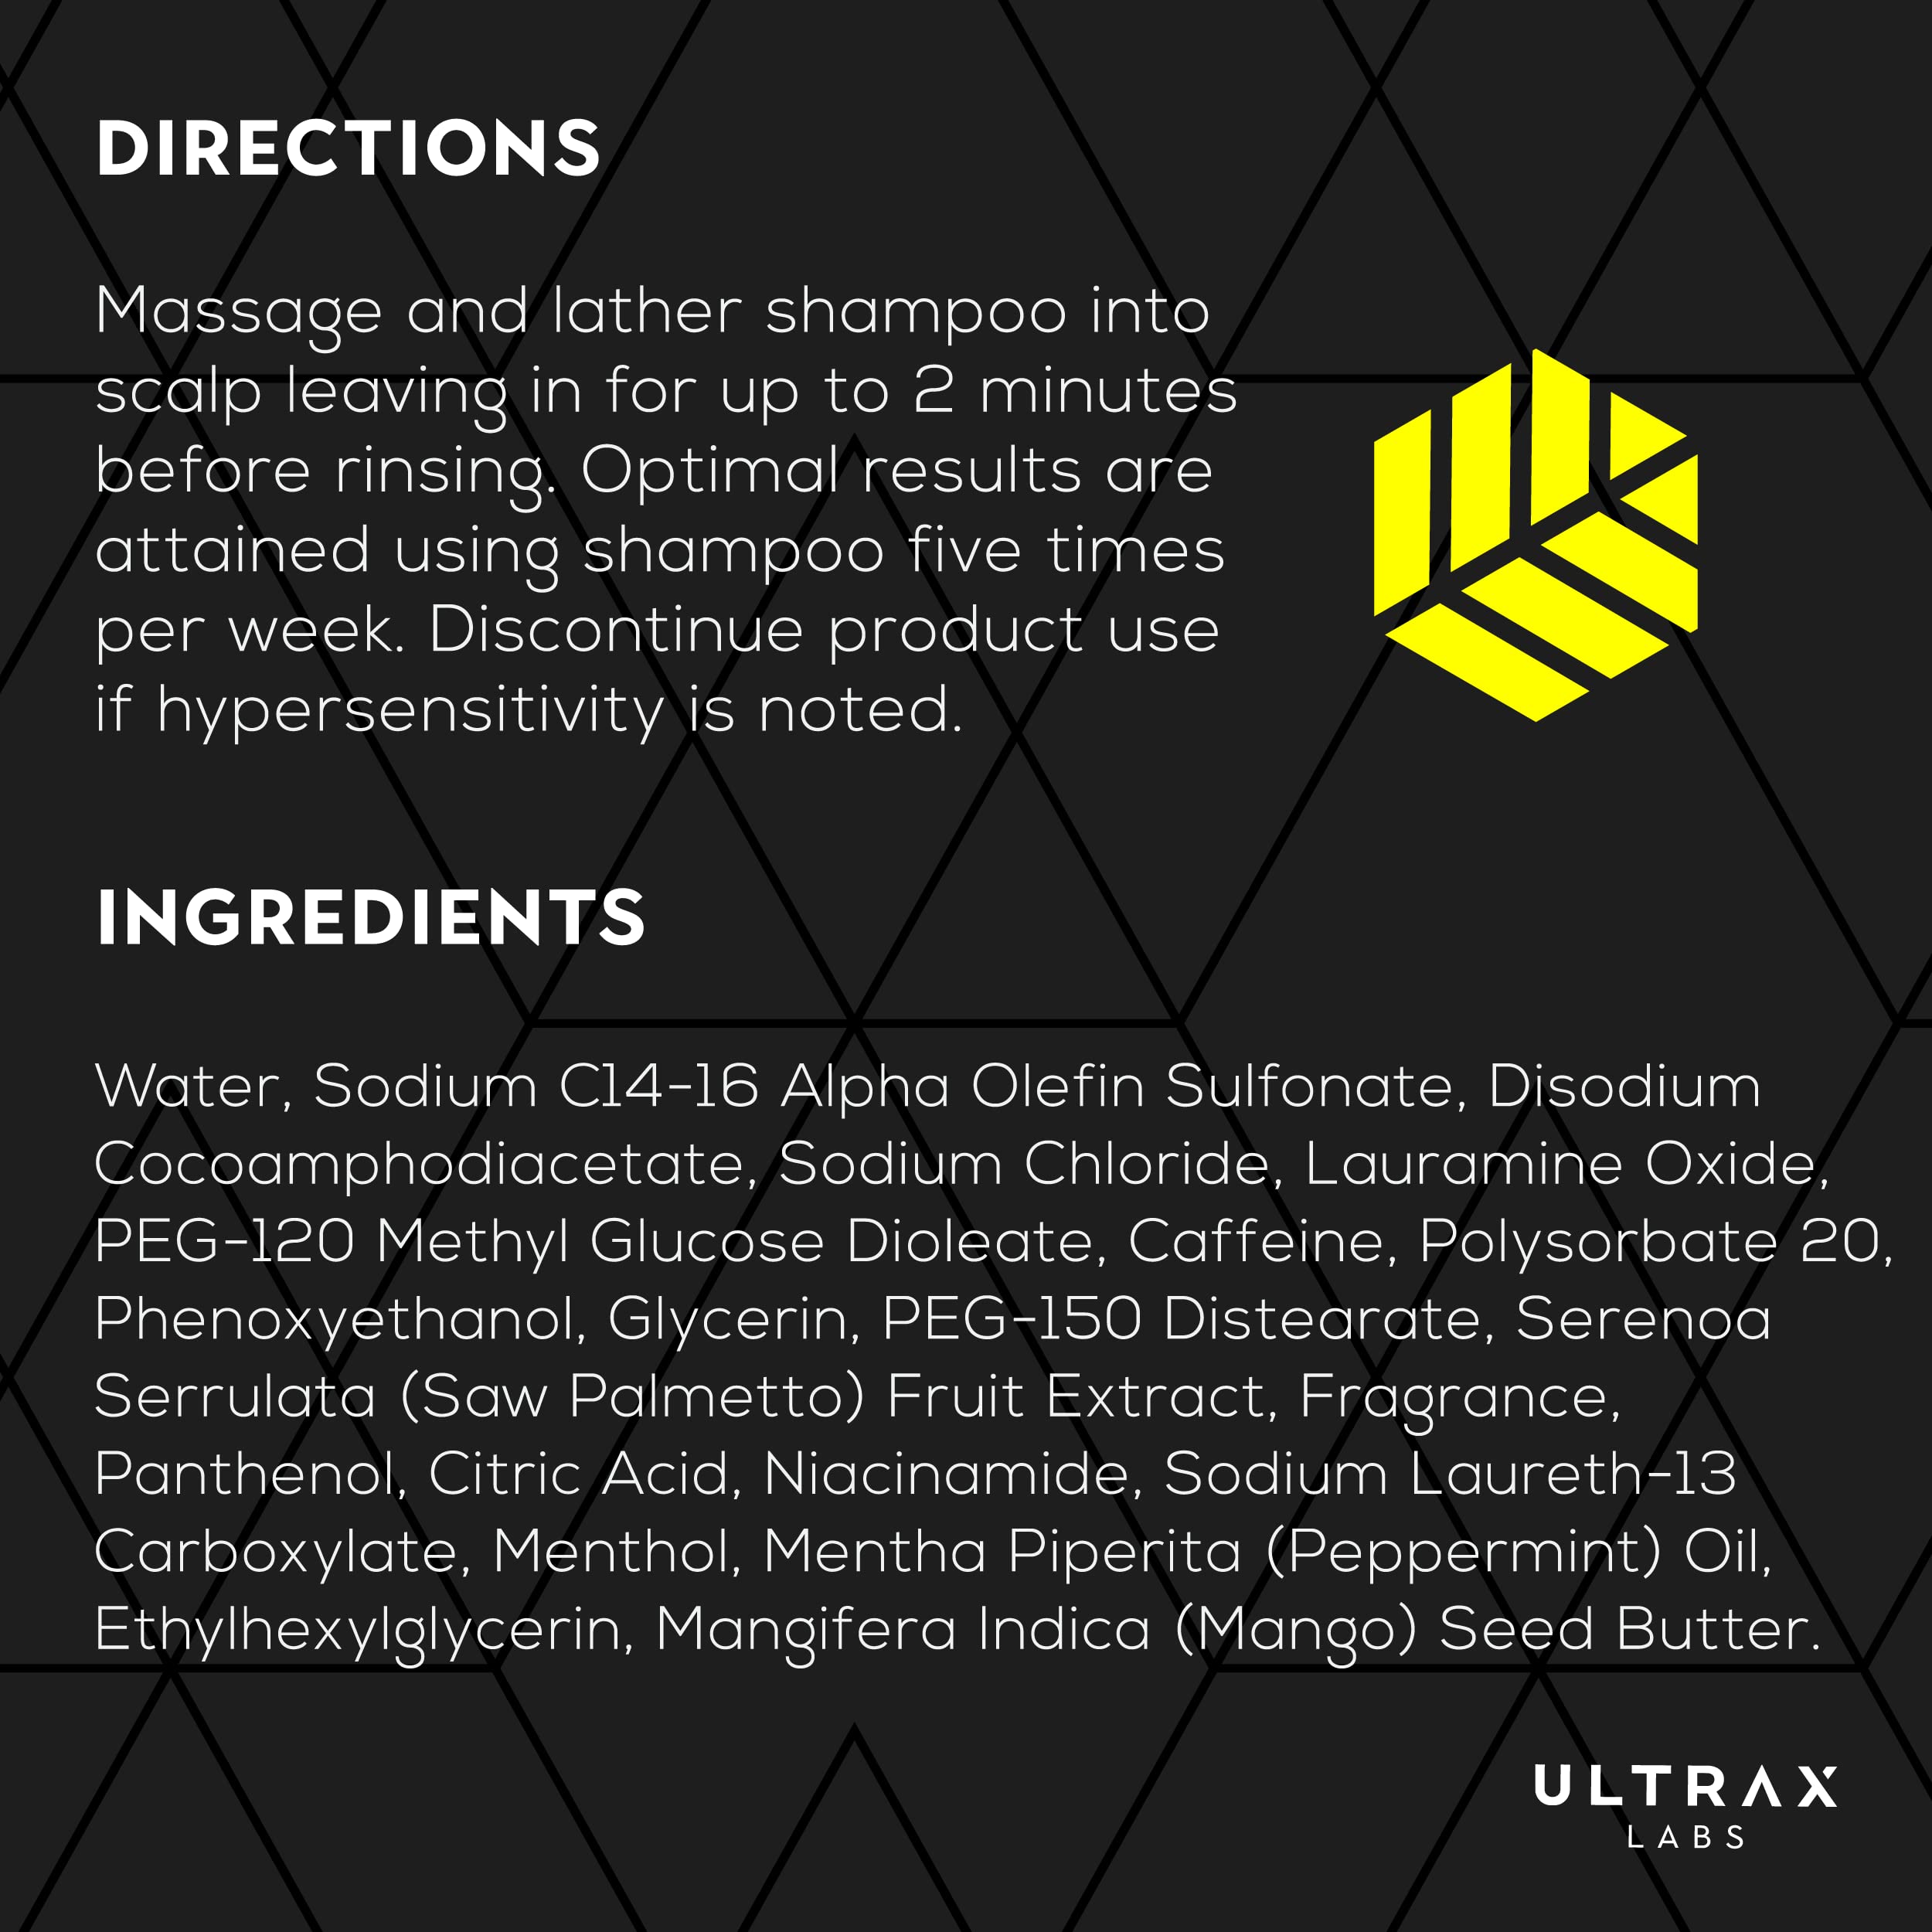 Ultrax Labs Hair Surge | Caffeine Hair Growth Shampoo for thinning hair, Hair Loss, and Thickening w/Ketoconazole for men and women 8 oz